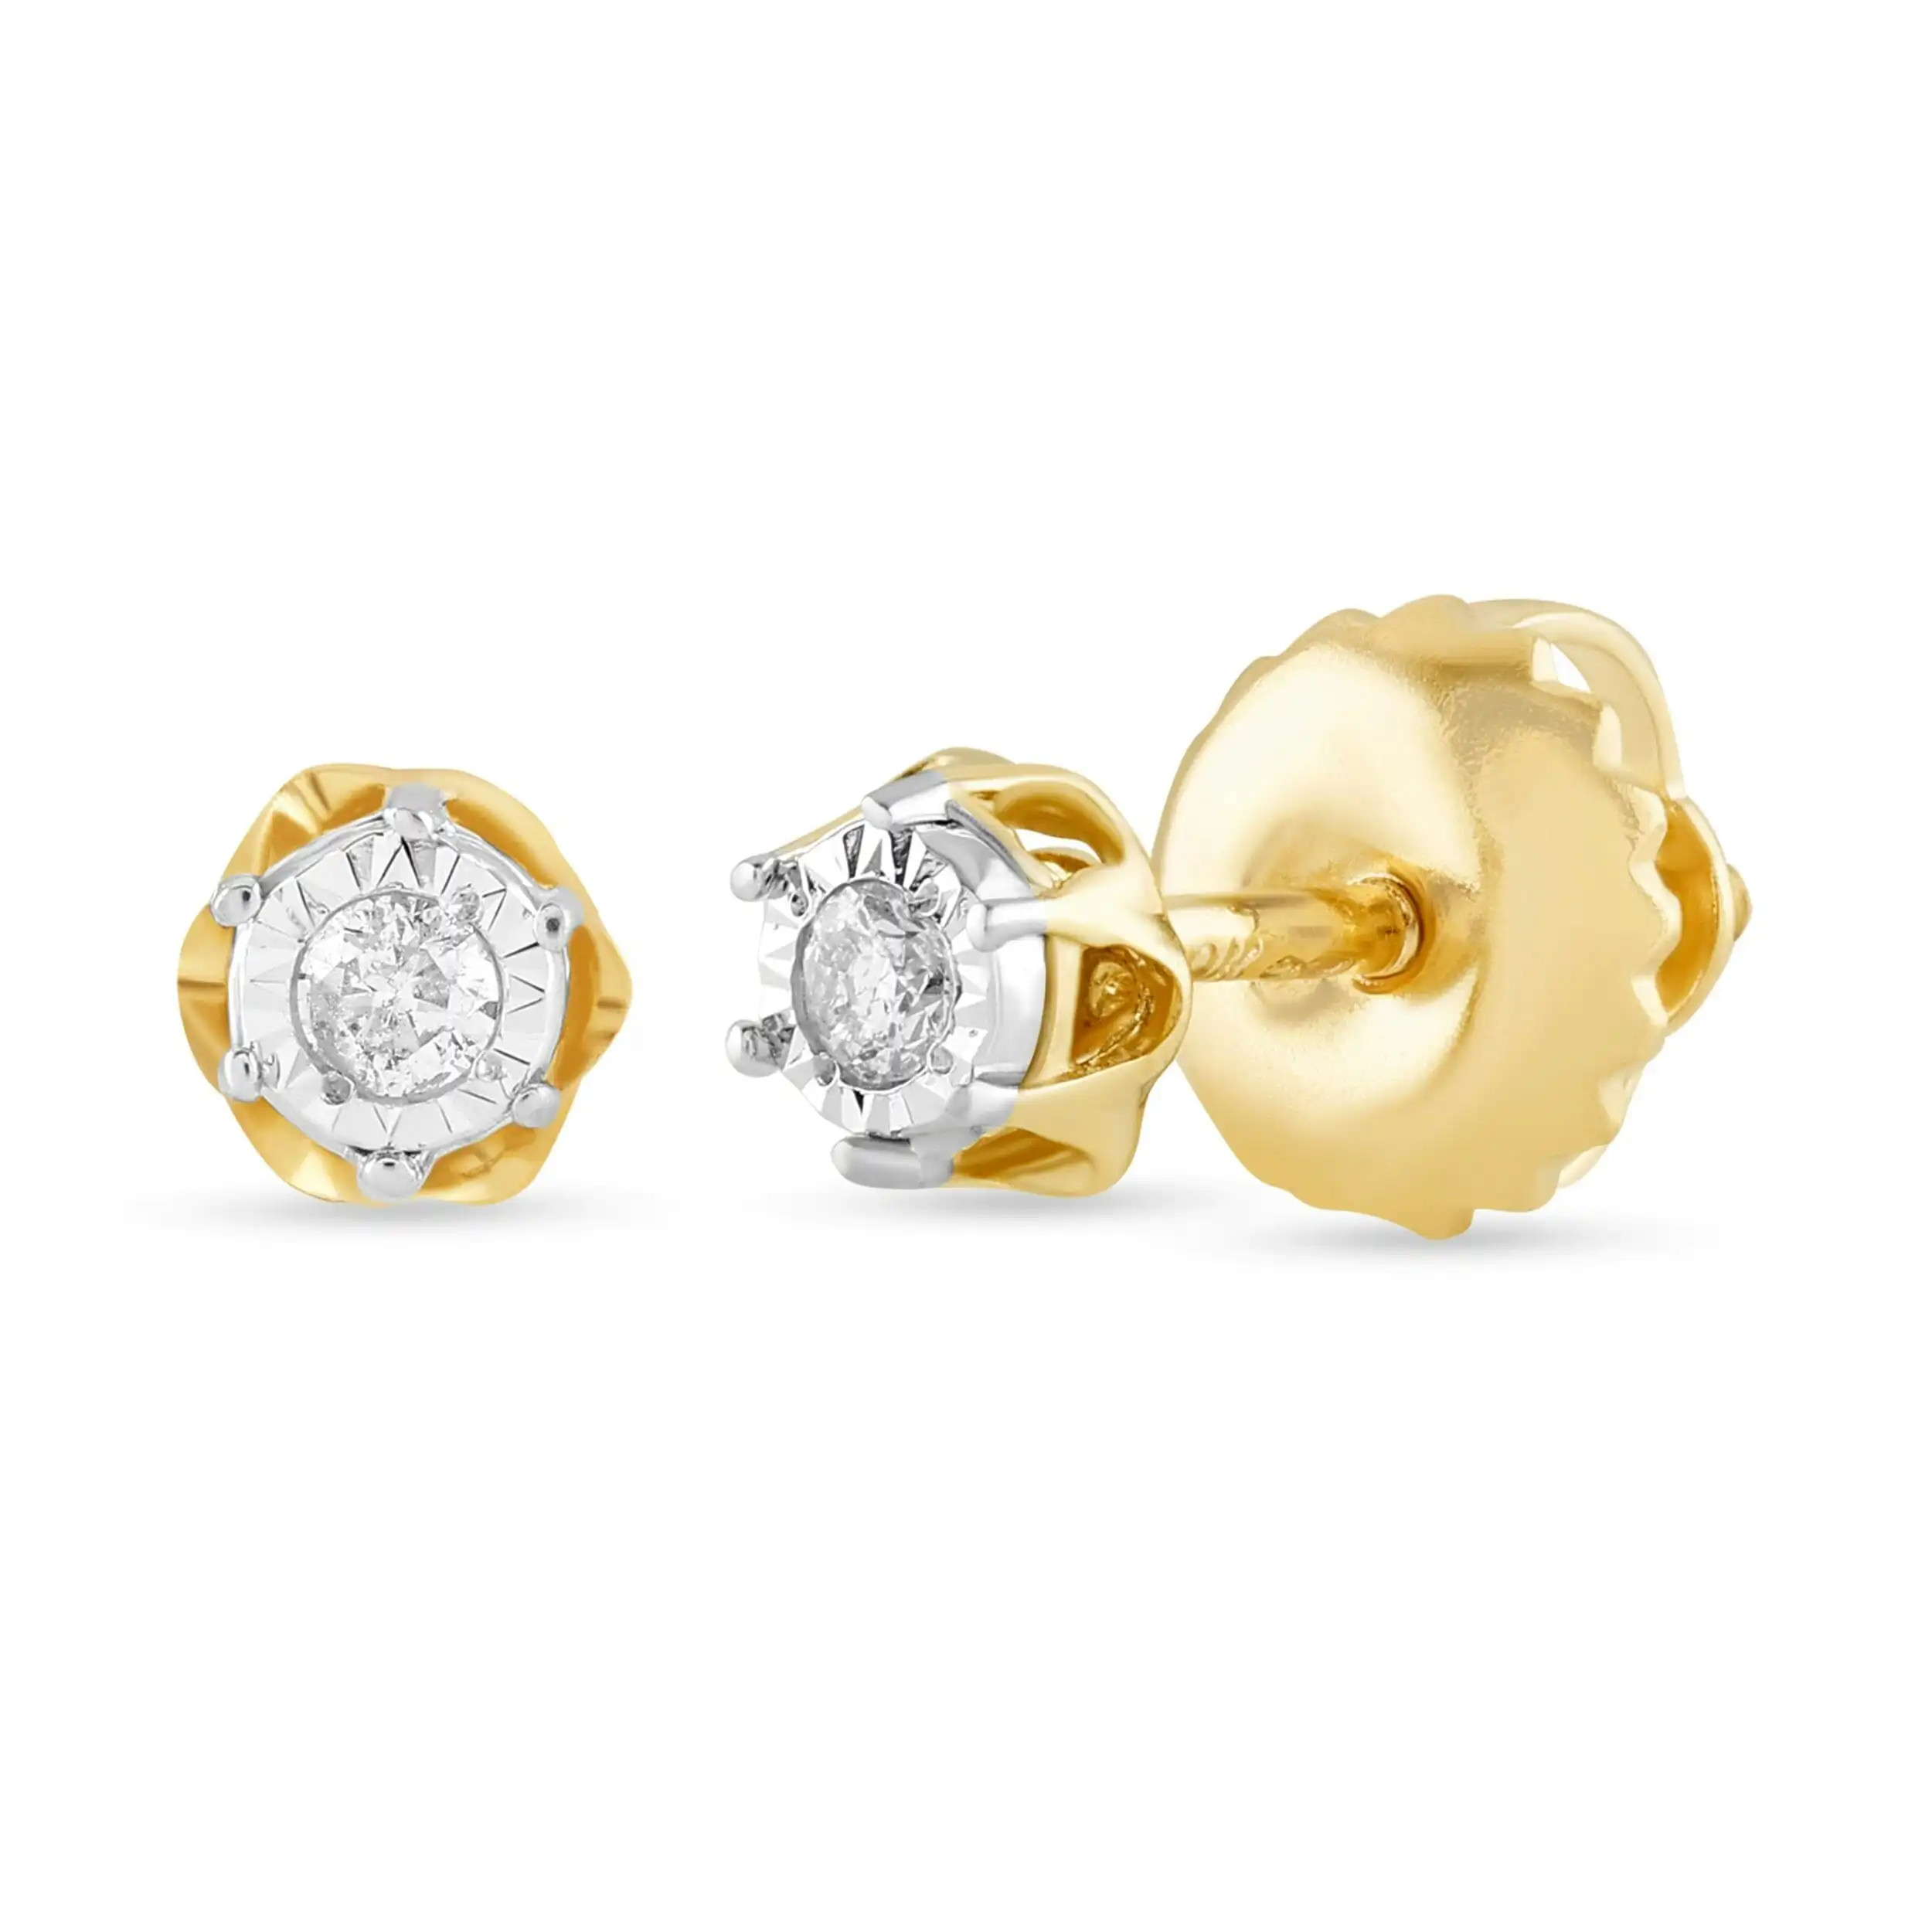 Children's Fancy Stud Earrings with 0.05ct of Diamonds in 9ct Yellow Gold